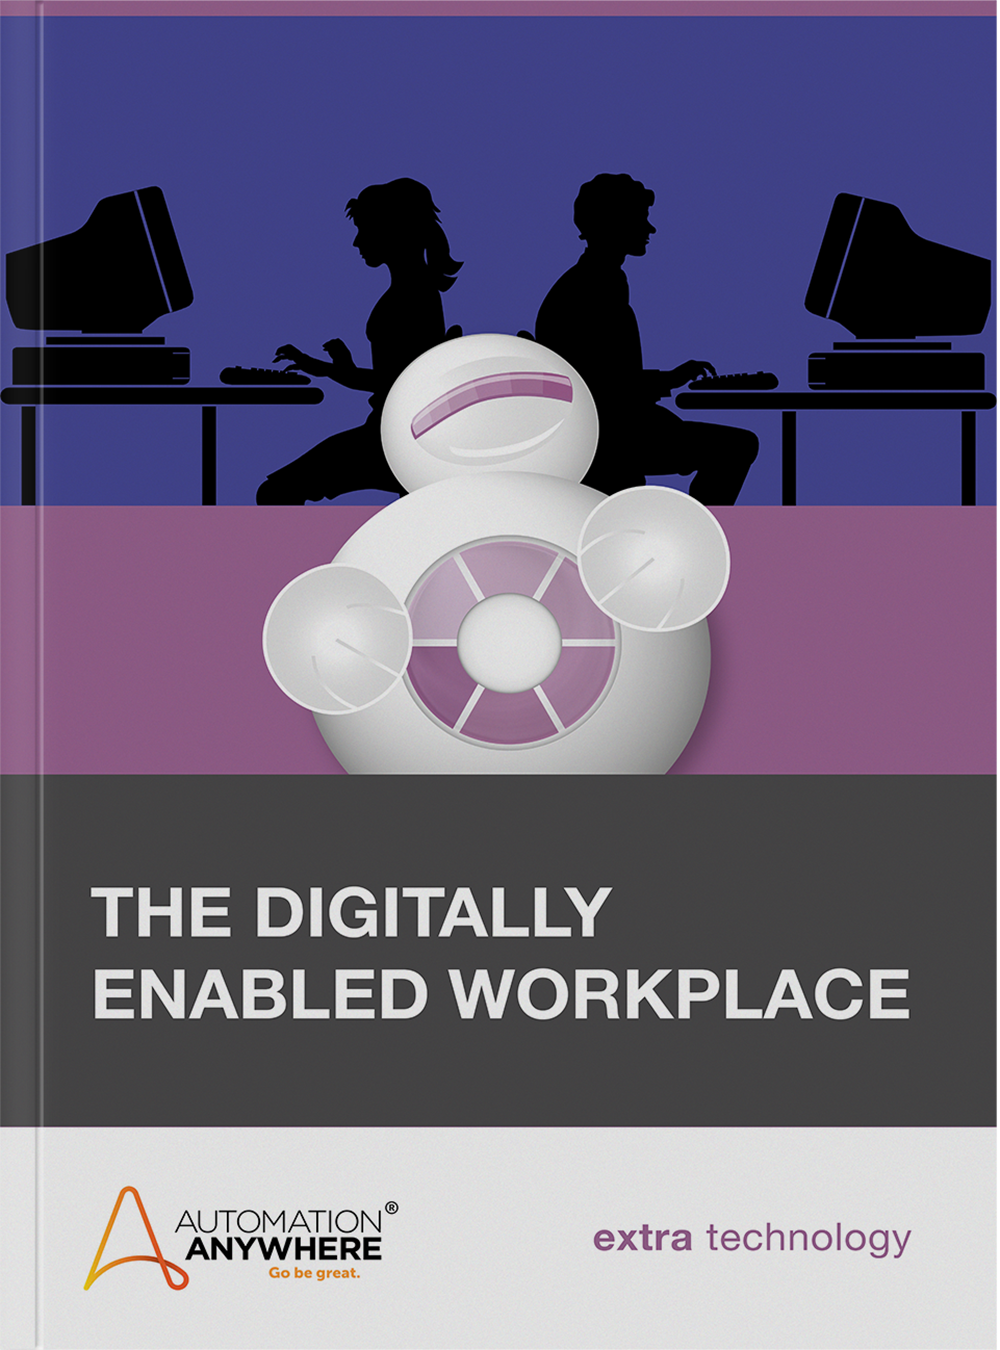 The digitally enabled workplace